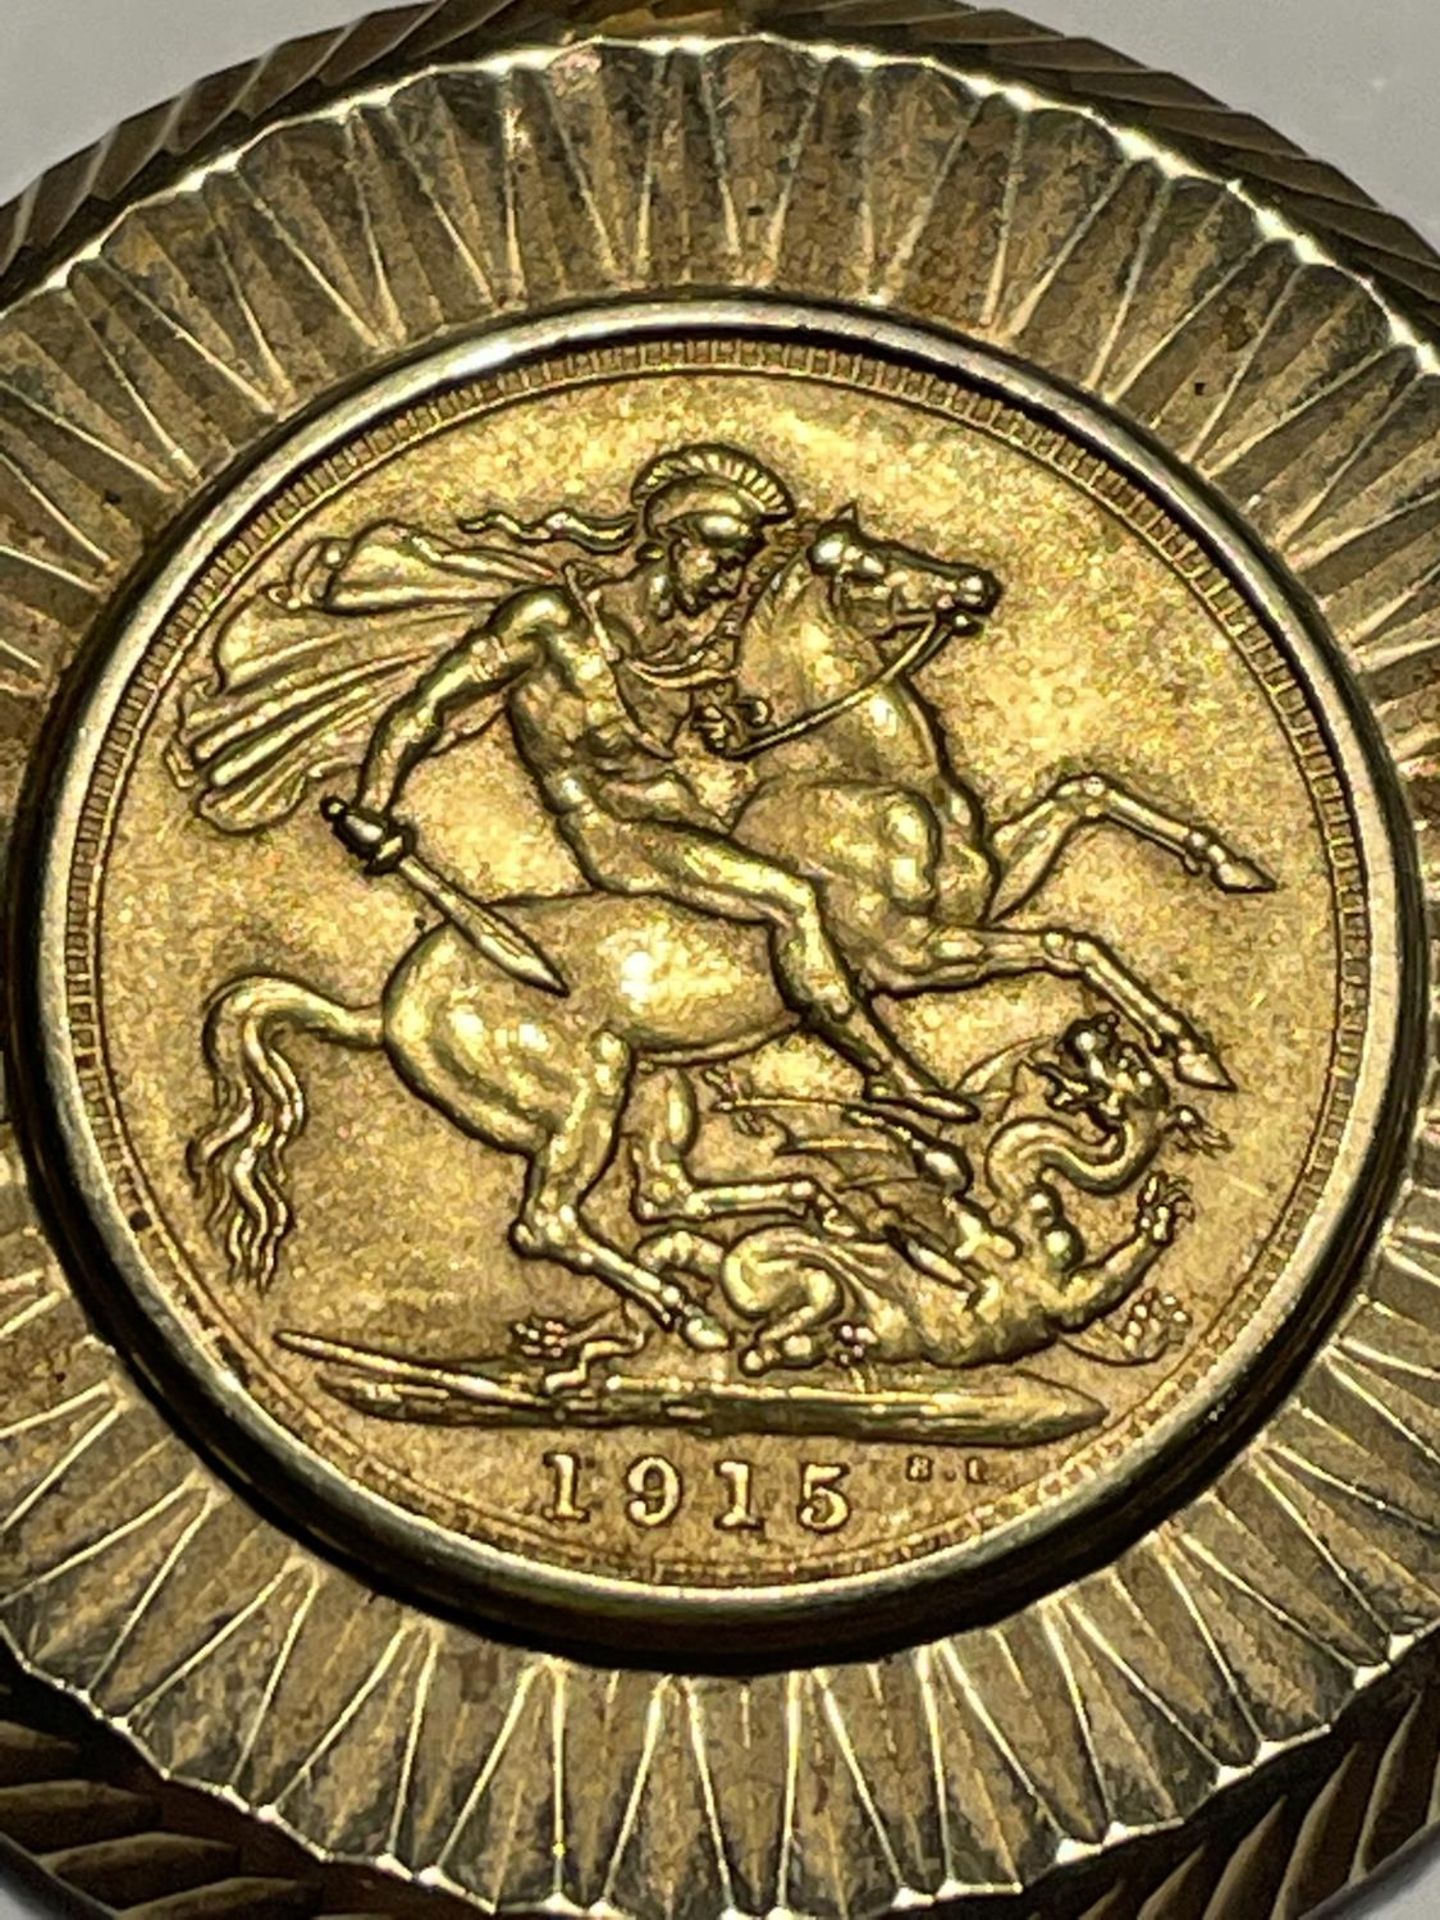 A 1915 GOLD SOVEREIGN IN A 9 CARAT GOLD MOUNT WITH A 9 CARAT GOLD CHAIN GROSS WEIGHT 19.78 GRAMS - Image 3 of 6